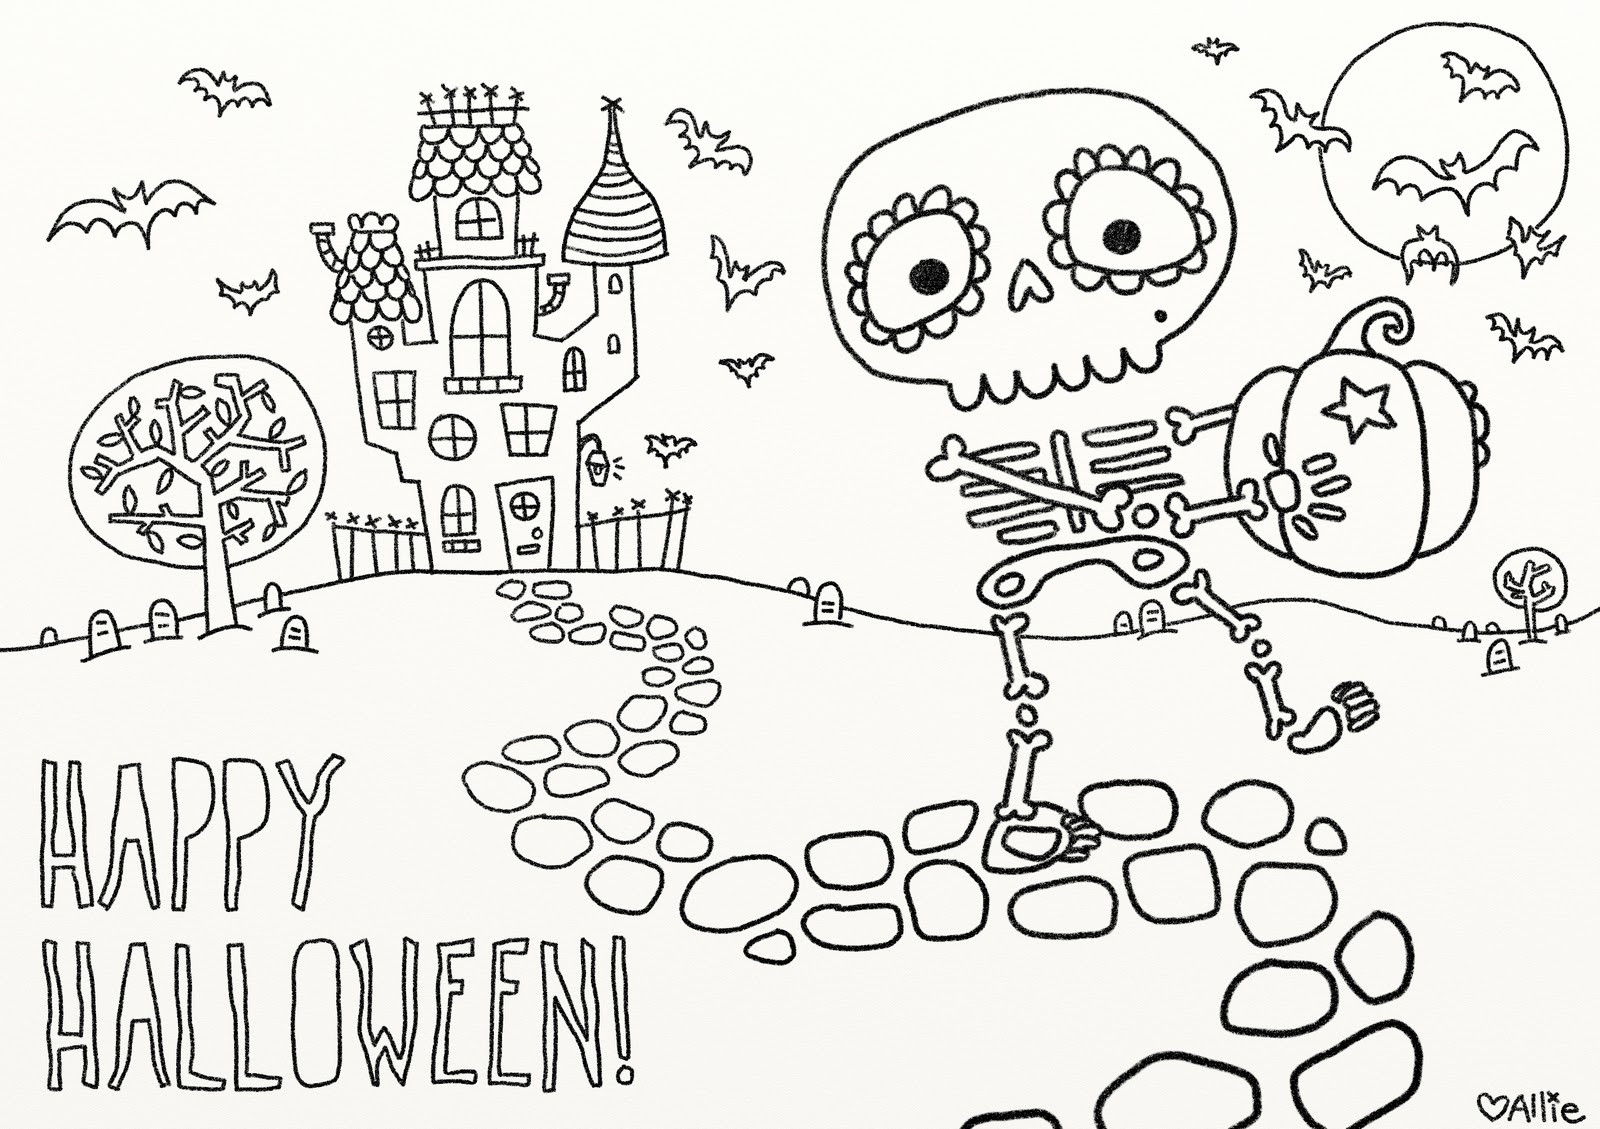 Coloring Pages For Halloween Printable
 9 fun free printable Halloween coloring pages